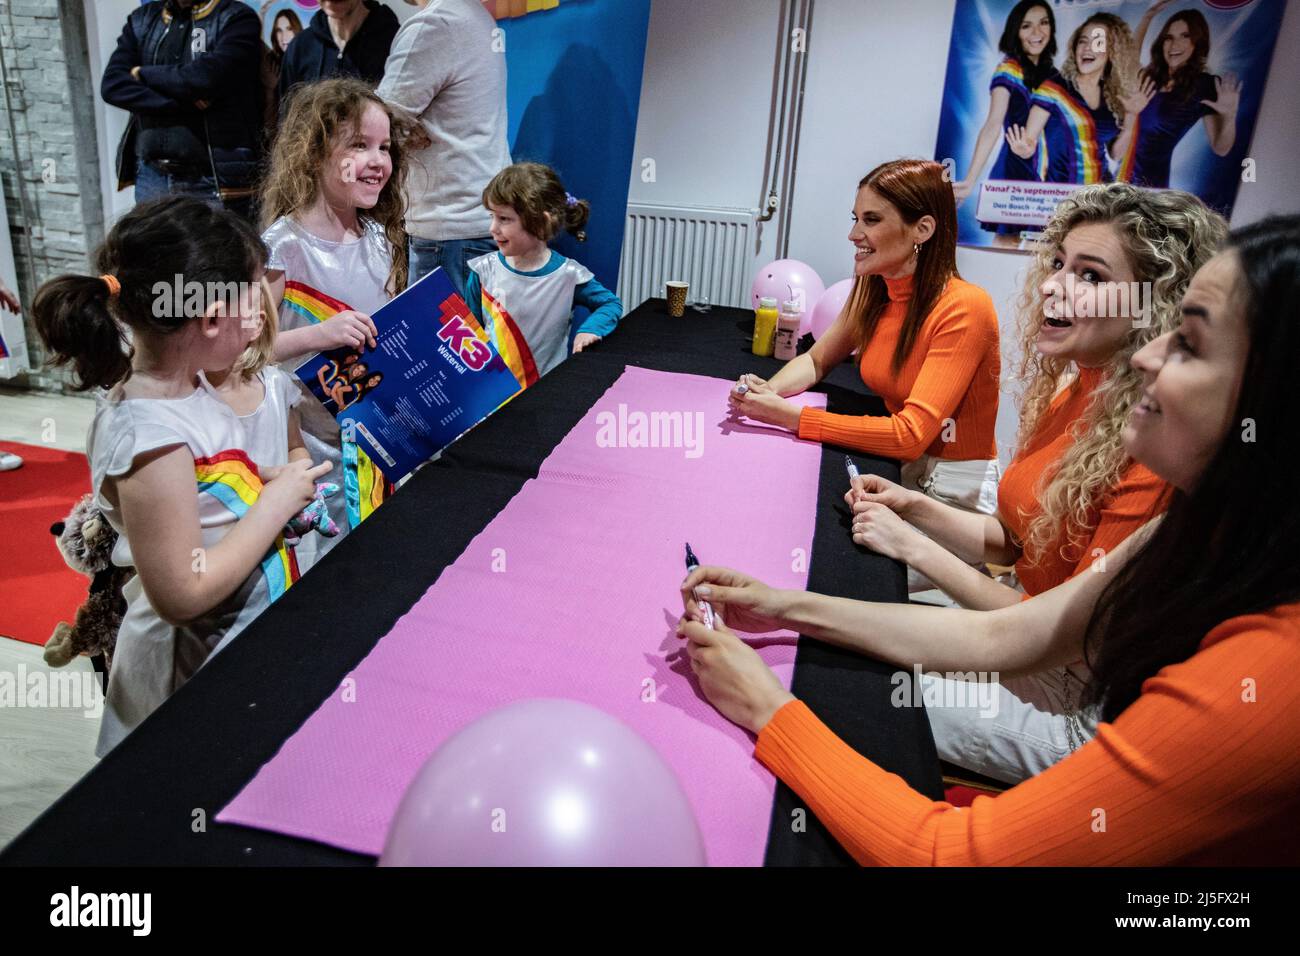 2022-04-23 11:52:59 BERGEN OP ZOOM - The Belgian girl group K3 with from left to right Hanne Verbruggen, Julia Boschman and Marthe DePillecyn will sign the new album Waterval during Record Store Day. Many fans, both young and old, stood in a line of more than a hundred meters for a long time. ANP KIPPA PAUL BERGEN netherlands out - belgium out Credit: ANP/Alamy Live News Stock Photo